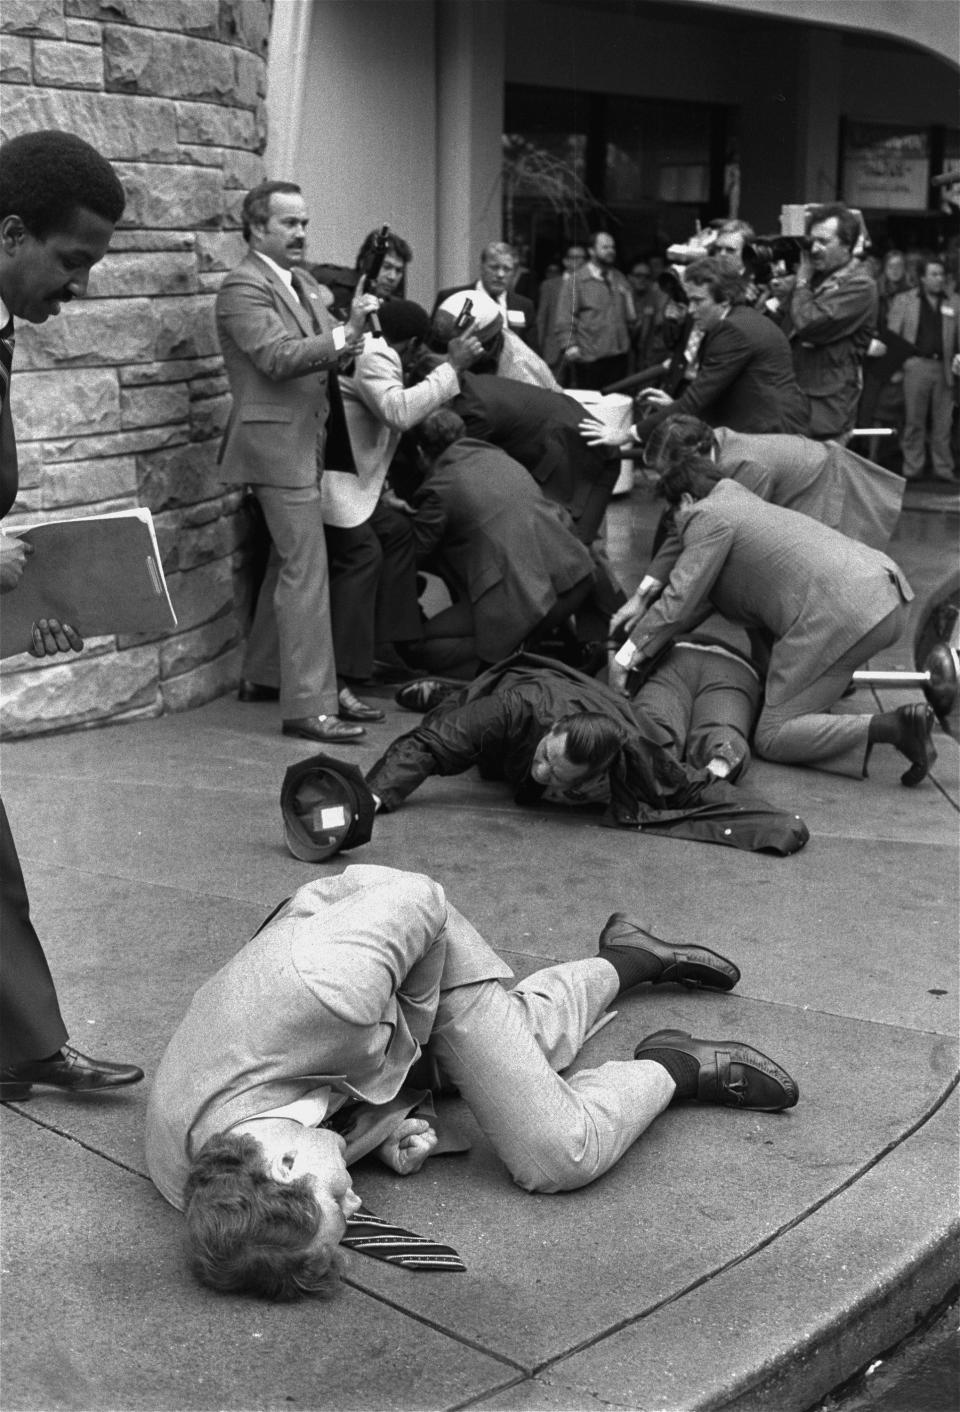 Secret Service agent Timothy J. McCarthy (foreground), Washington policeman Thomas K. Delehanty (center) and presidential press secretary James Brady lie wounded on a street outside a Washington hotel after shots were fired at President Ronald Reagan.